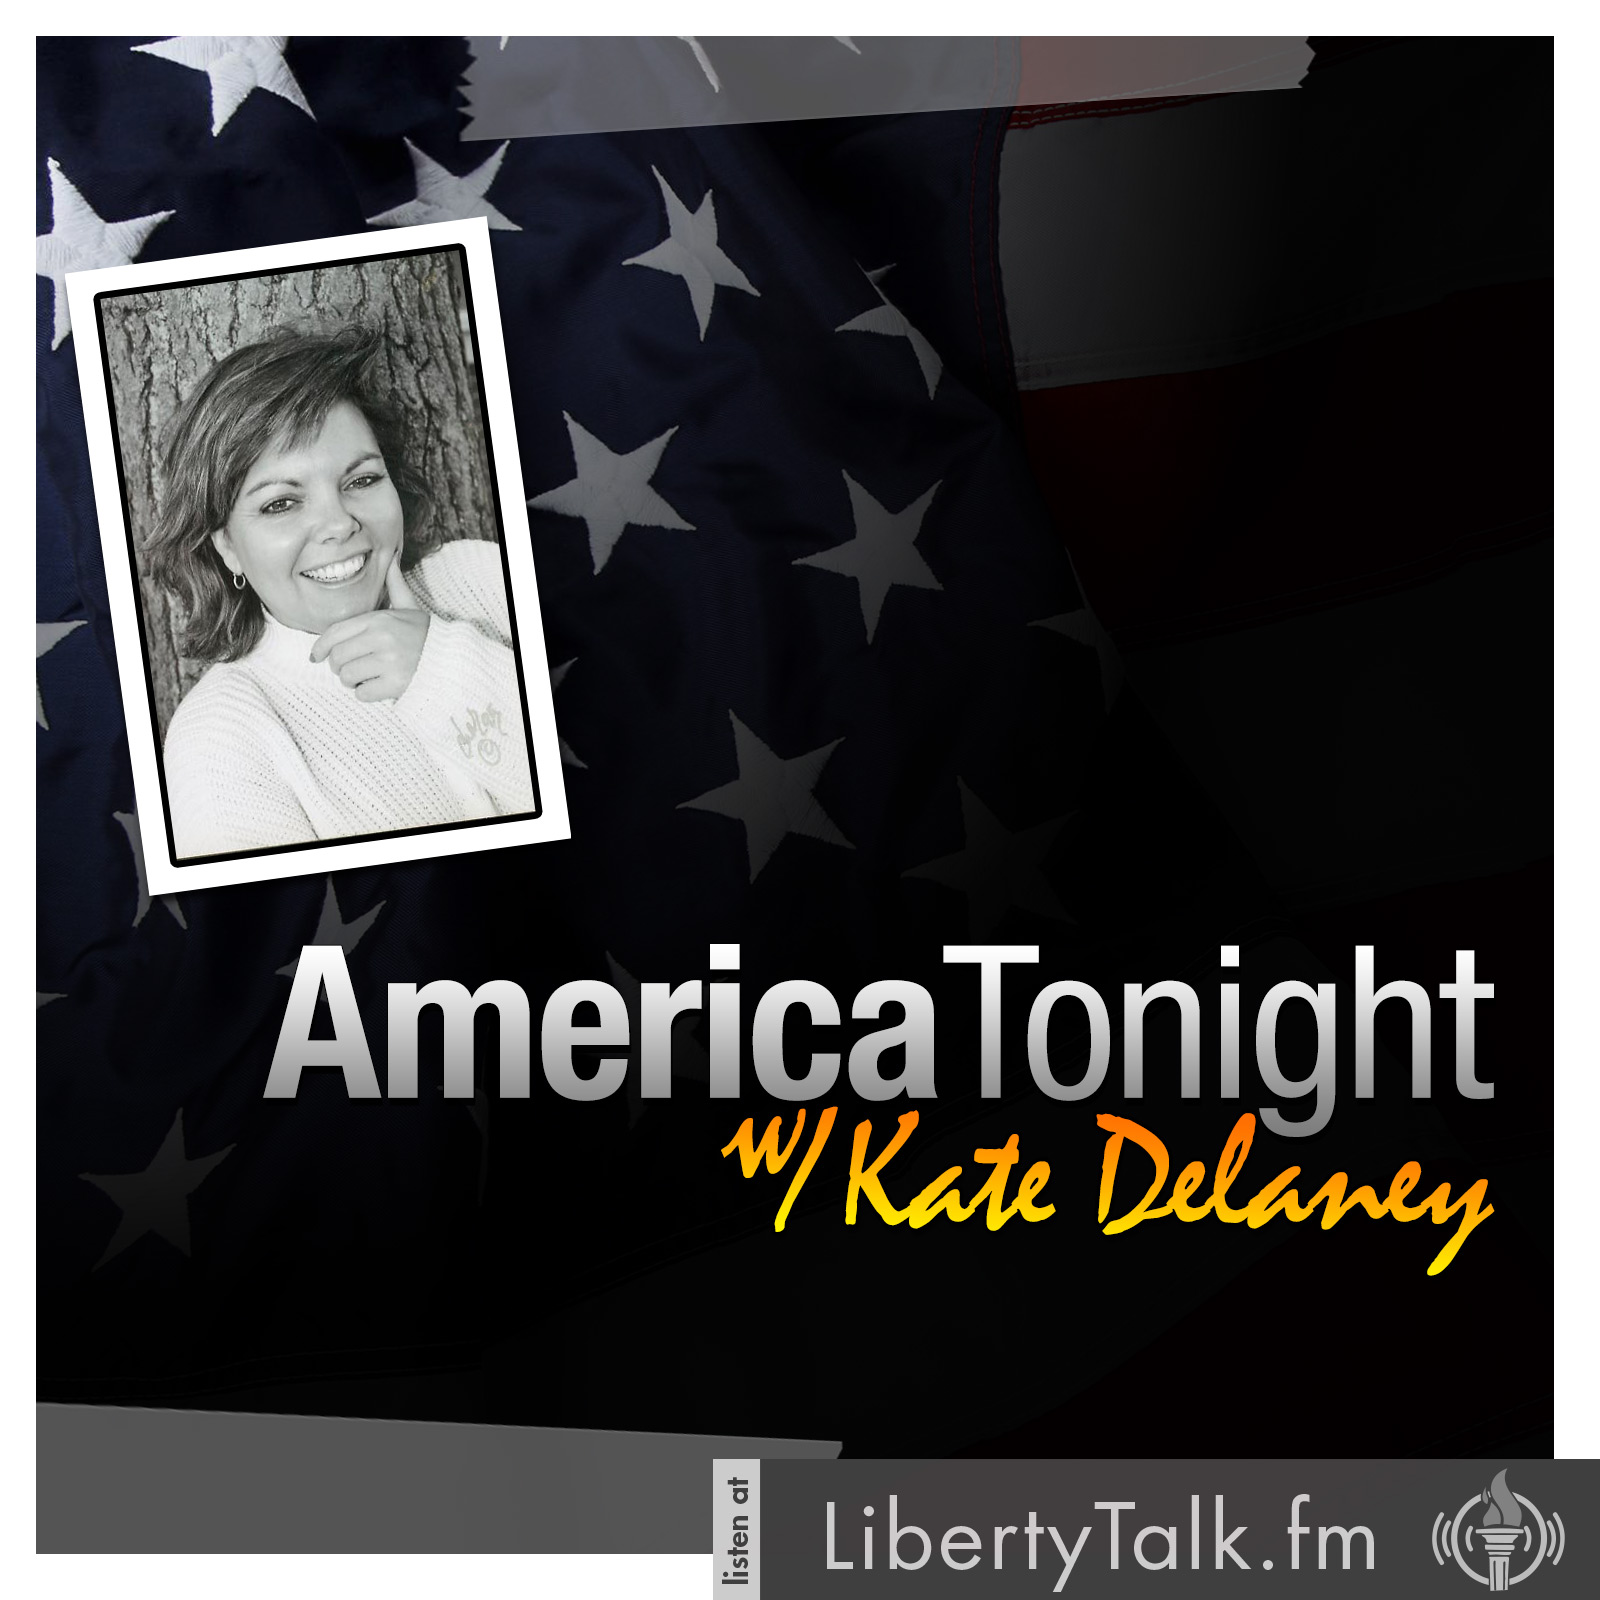 America Tonight with Kate Delaney on Liberty Talk FM - Show LOGO